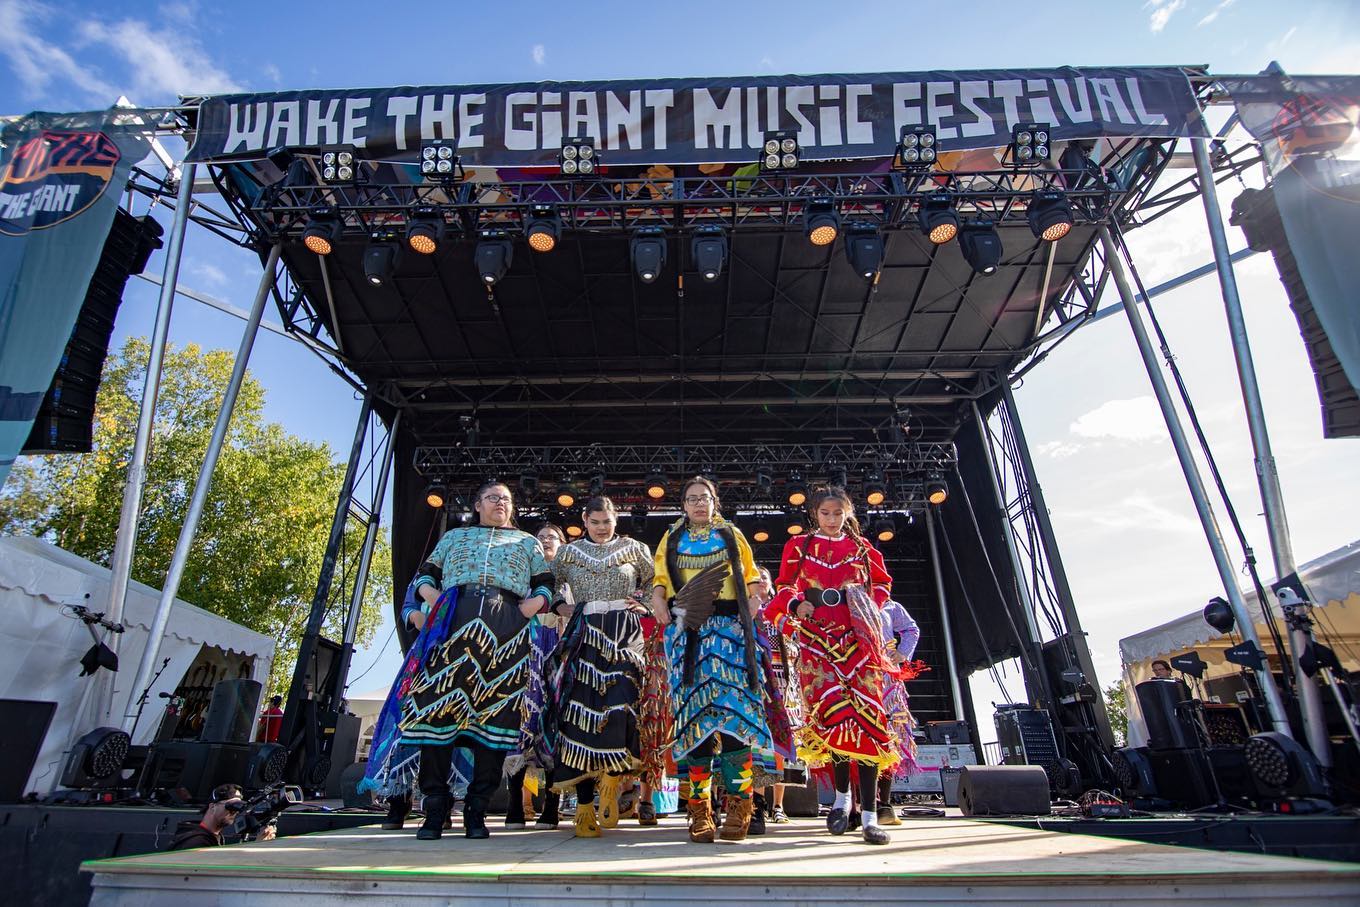 Four Indigenous women on stage in traditional dress at Wake the Giant Music Festival